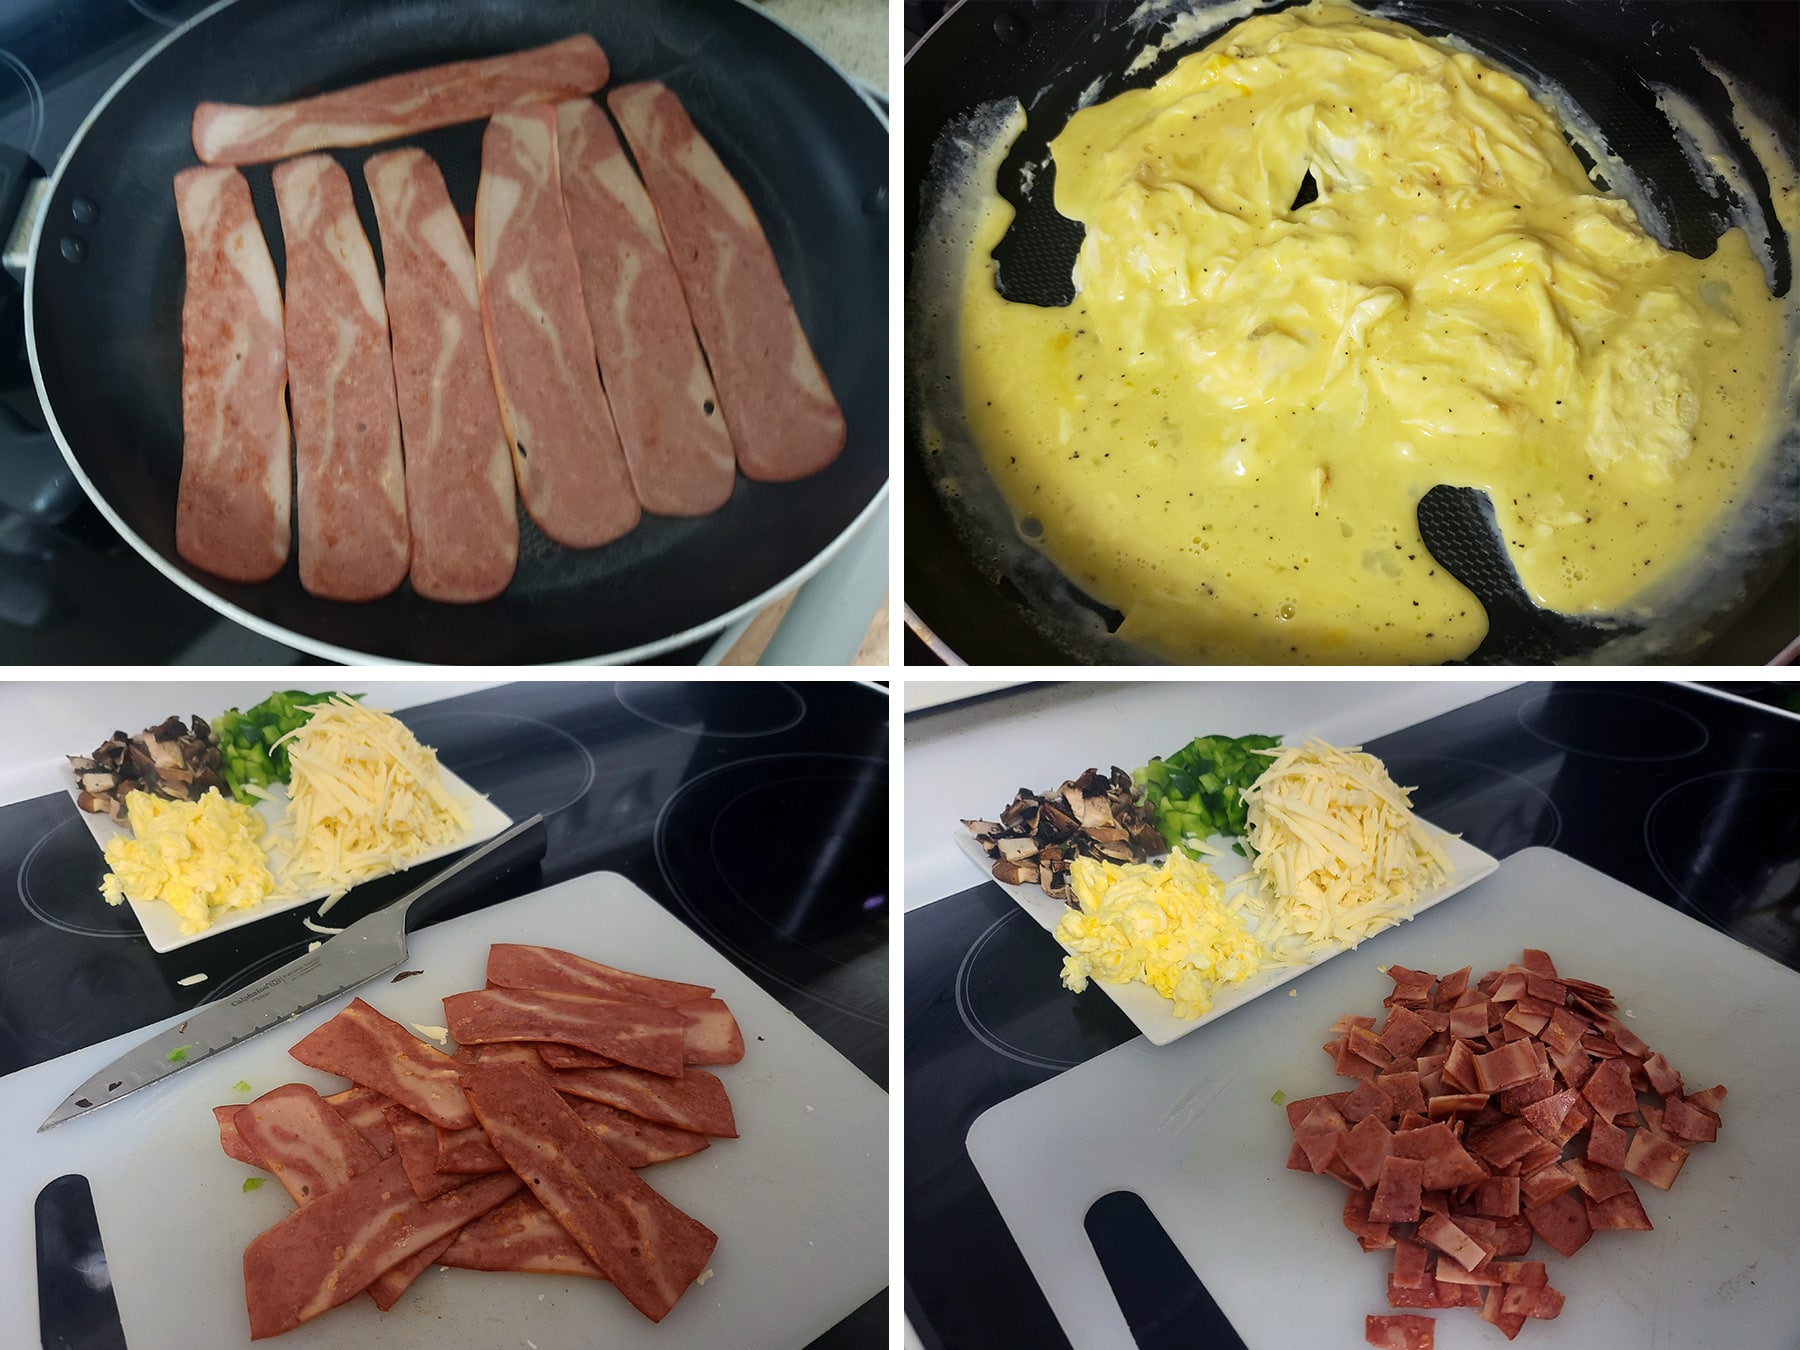 A 4 part image showing bacon and scrambled eggs being cooked, and a plate of shredded cheese and prepared veggies.